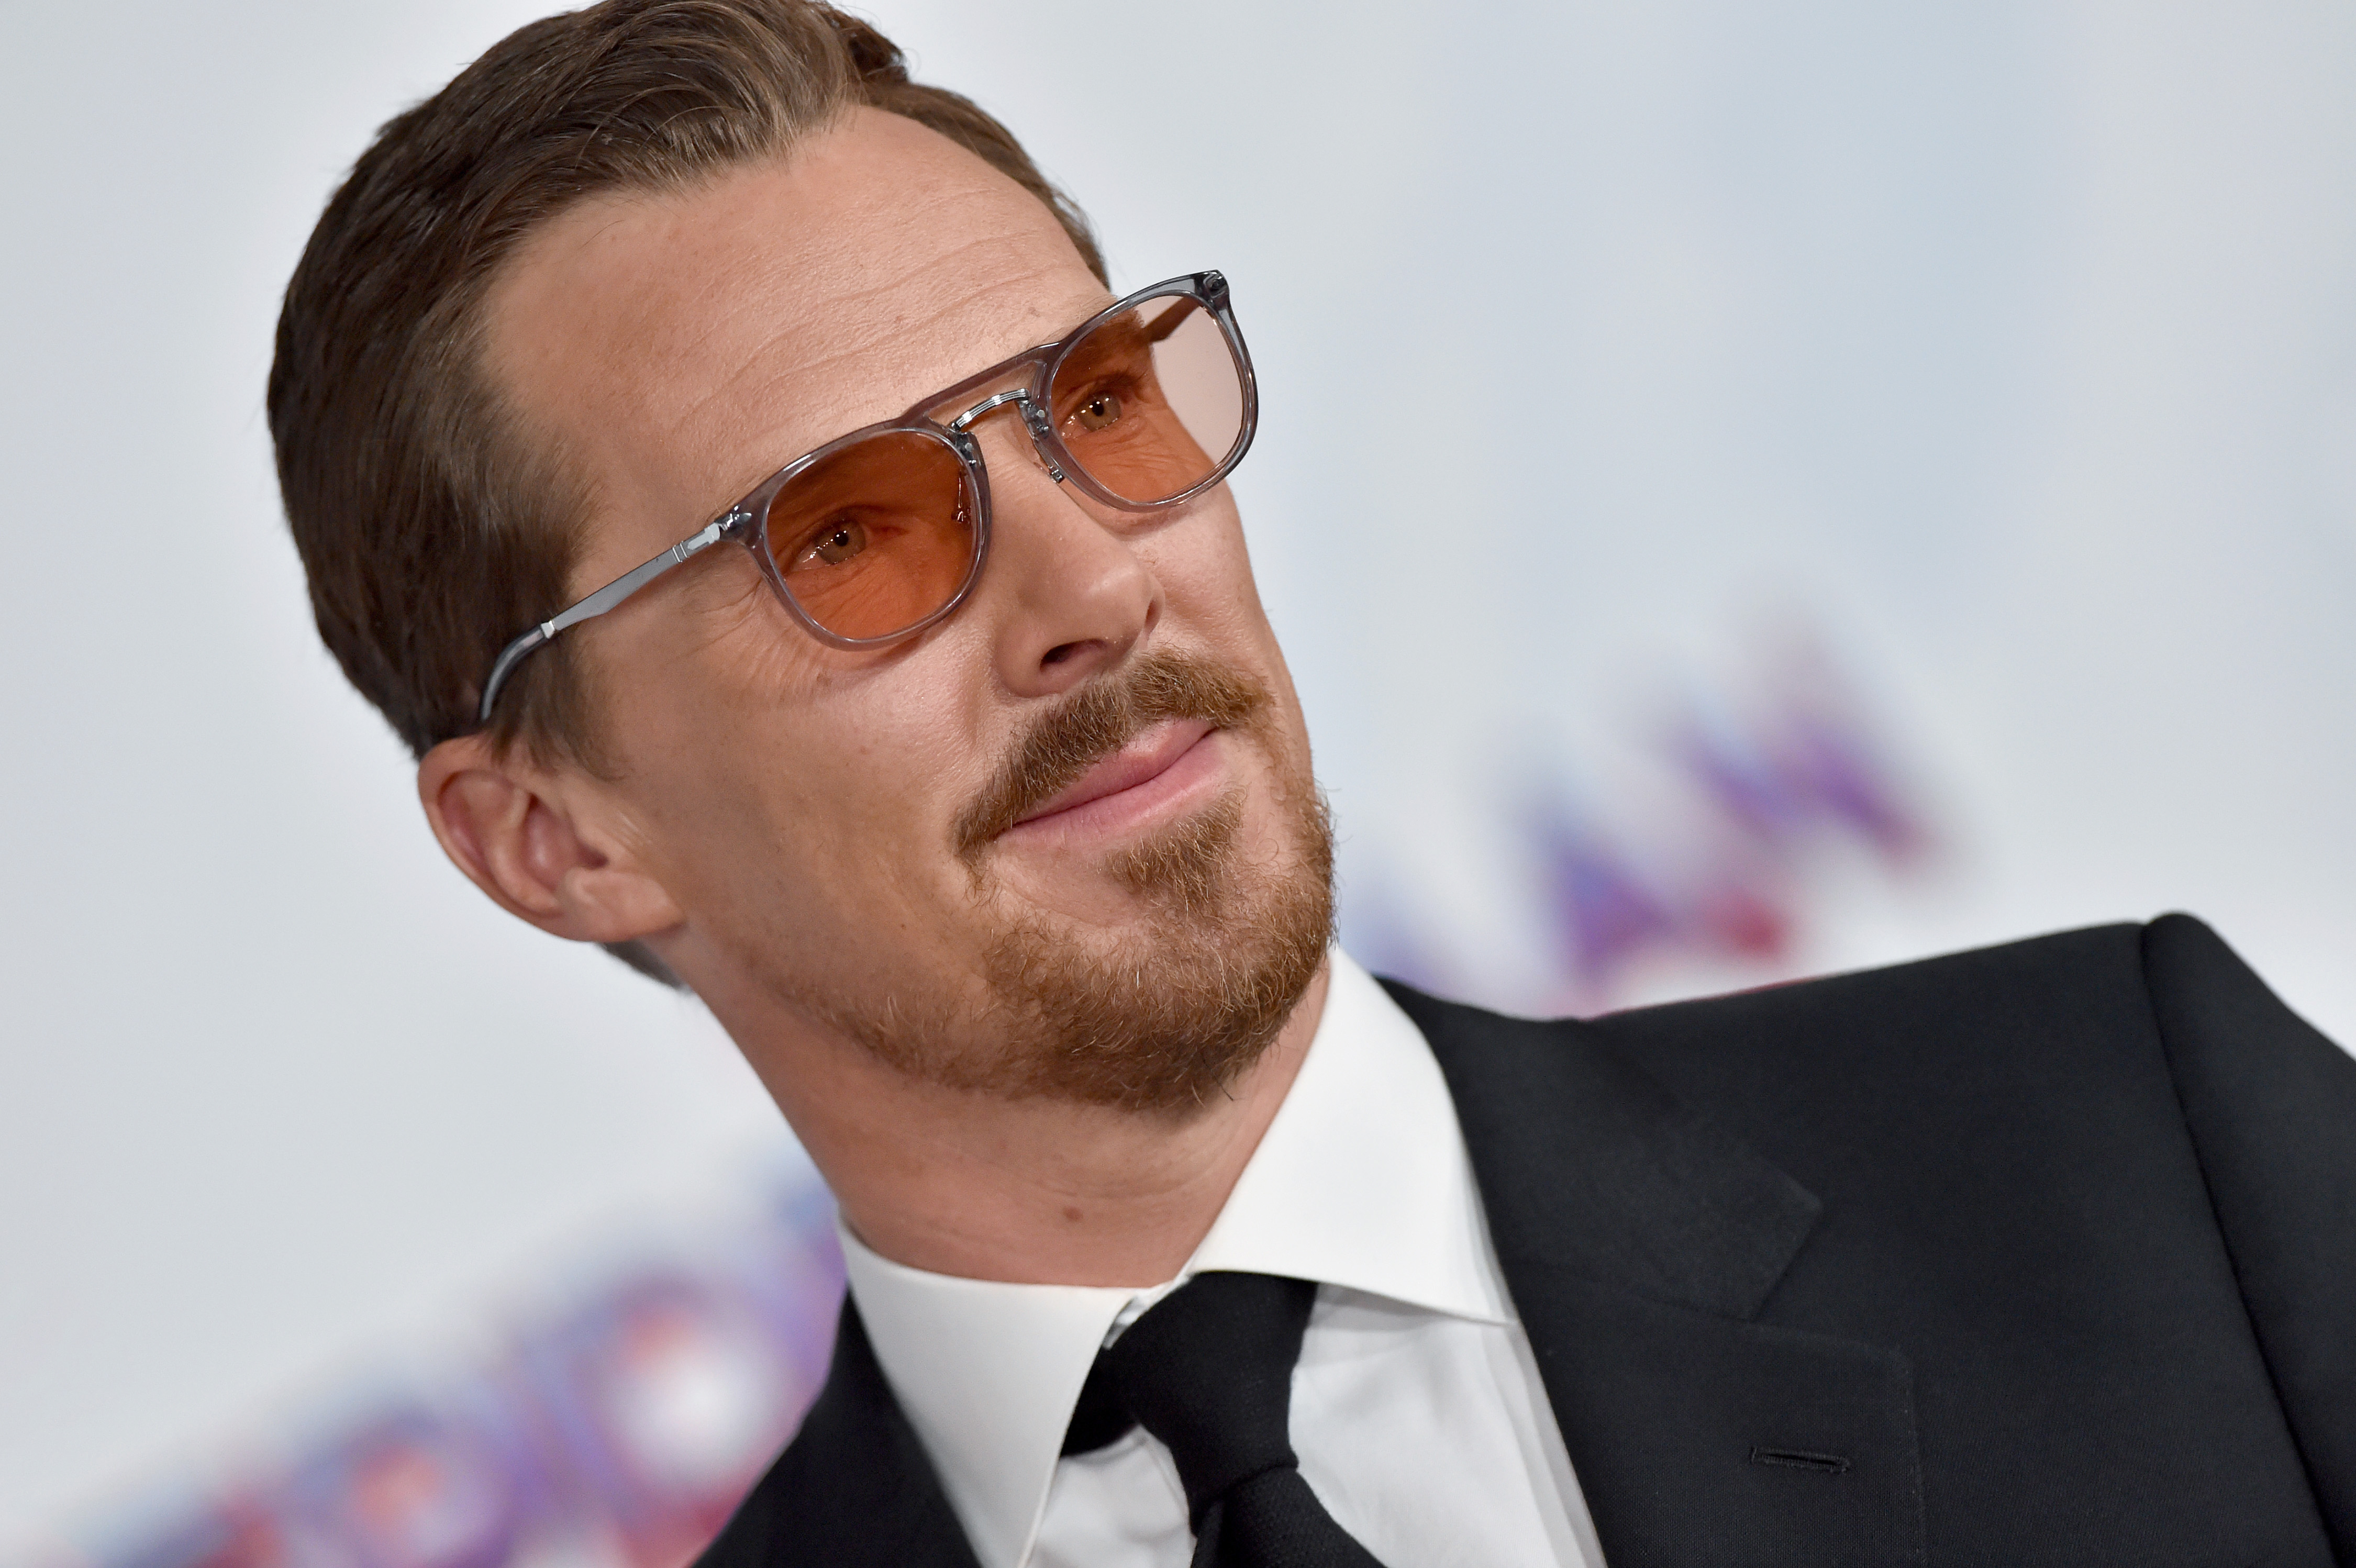 'Doctor Strange in the Multiverse of Madness' star Benedict Cumberbatch, who appears as both a hero and villain in the trailer, wears orange-tinted glasses and a black suit over a white-button up shirt and black tie.